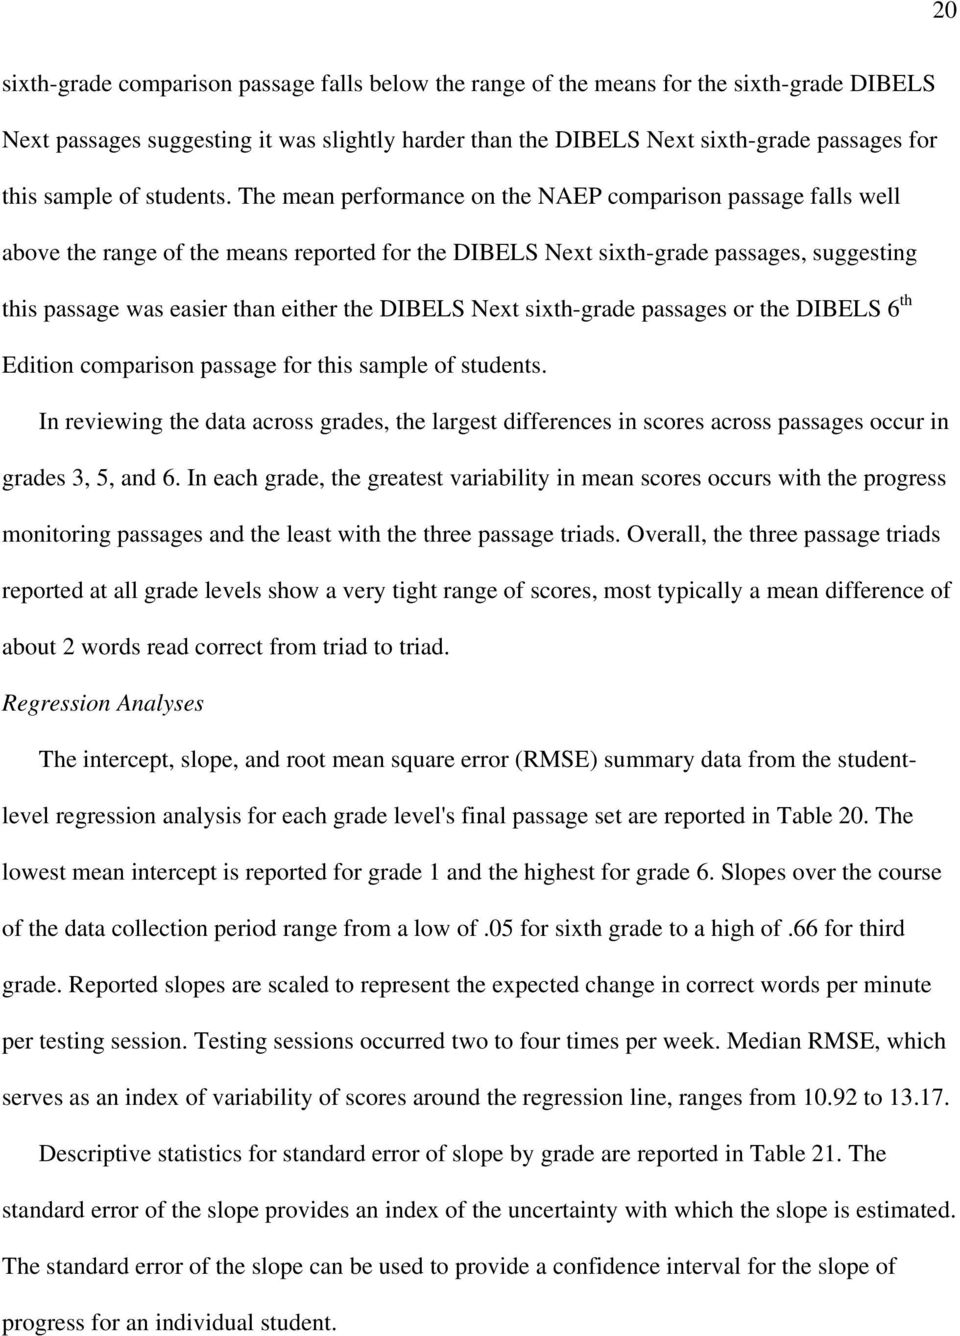 Dibels Next Oral Reading Fluency Readability Study Technical Report 7 Pdf Free Download